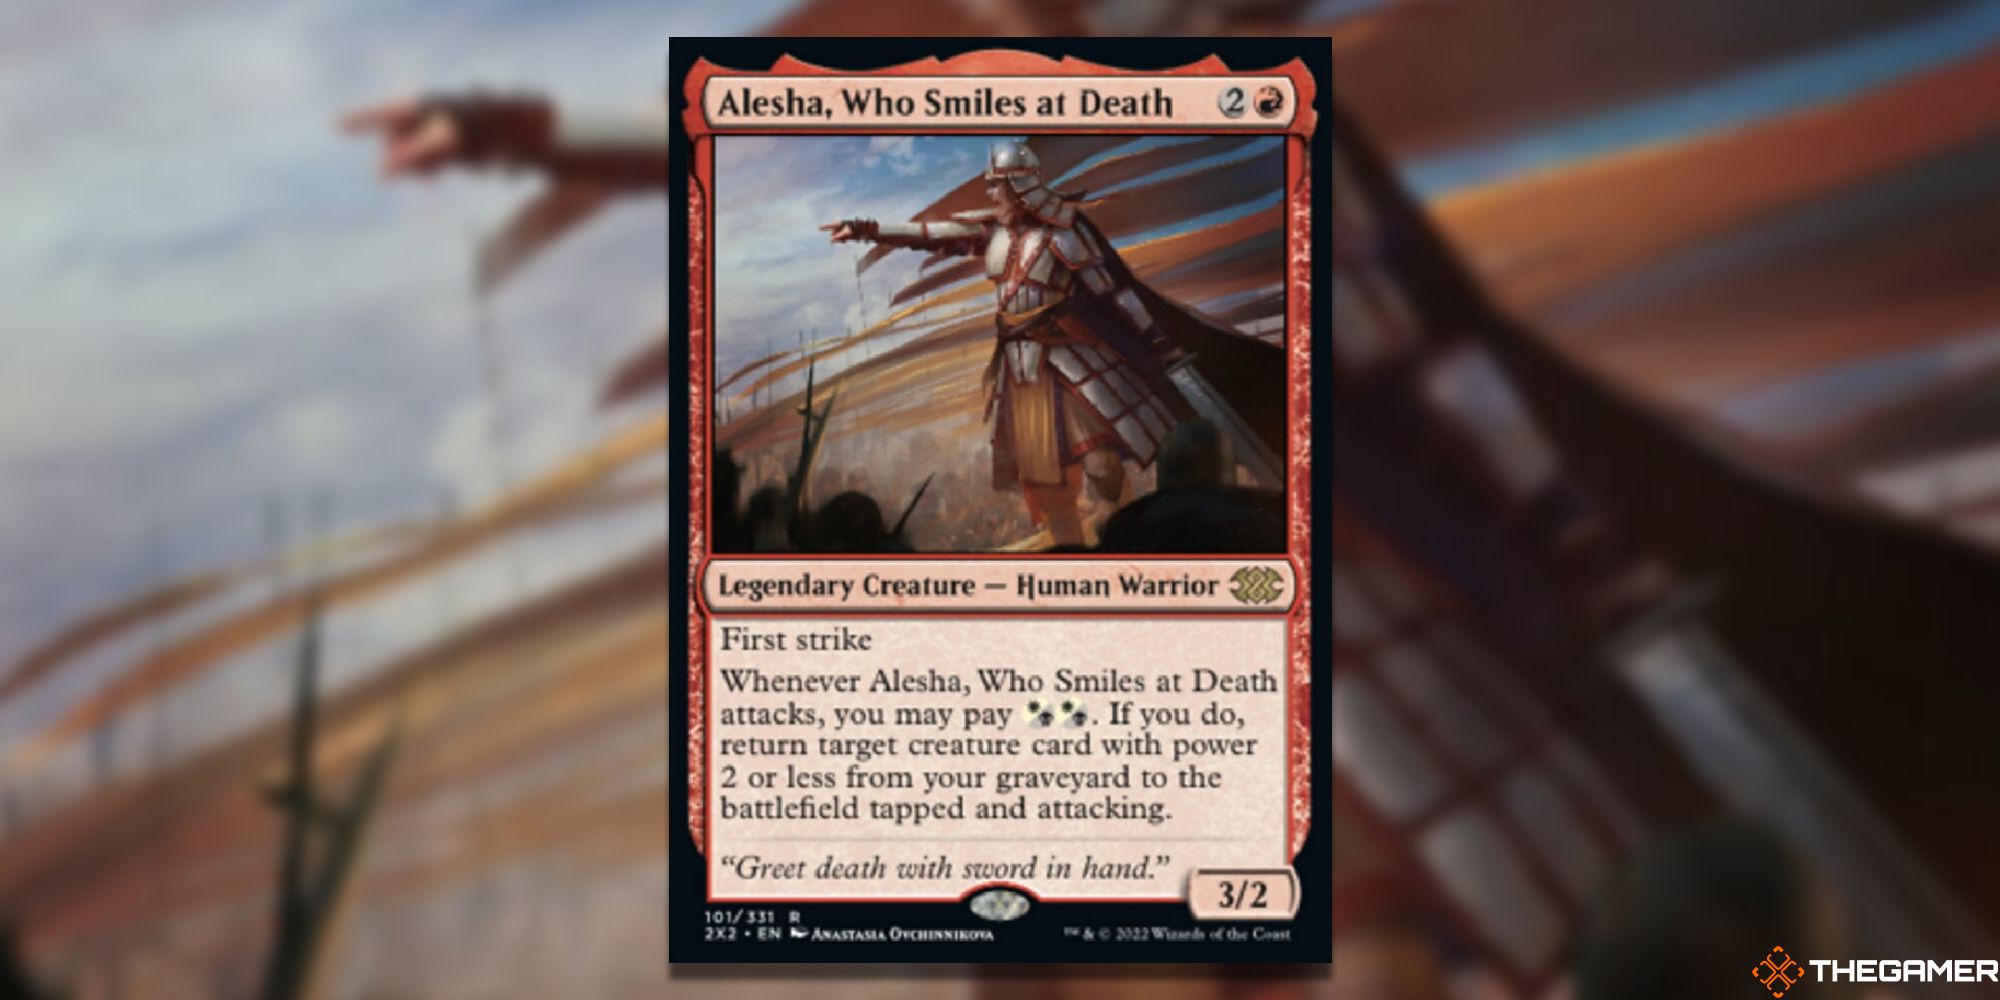 Magic: The Gathering Alesha, Who Smiles at Death full card with background